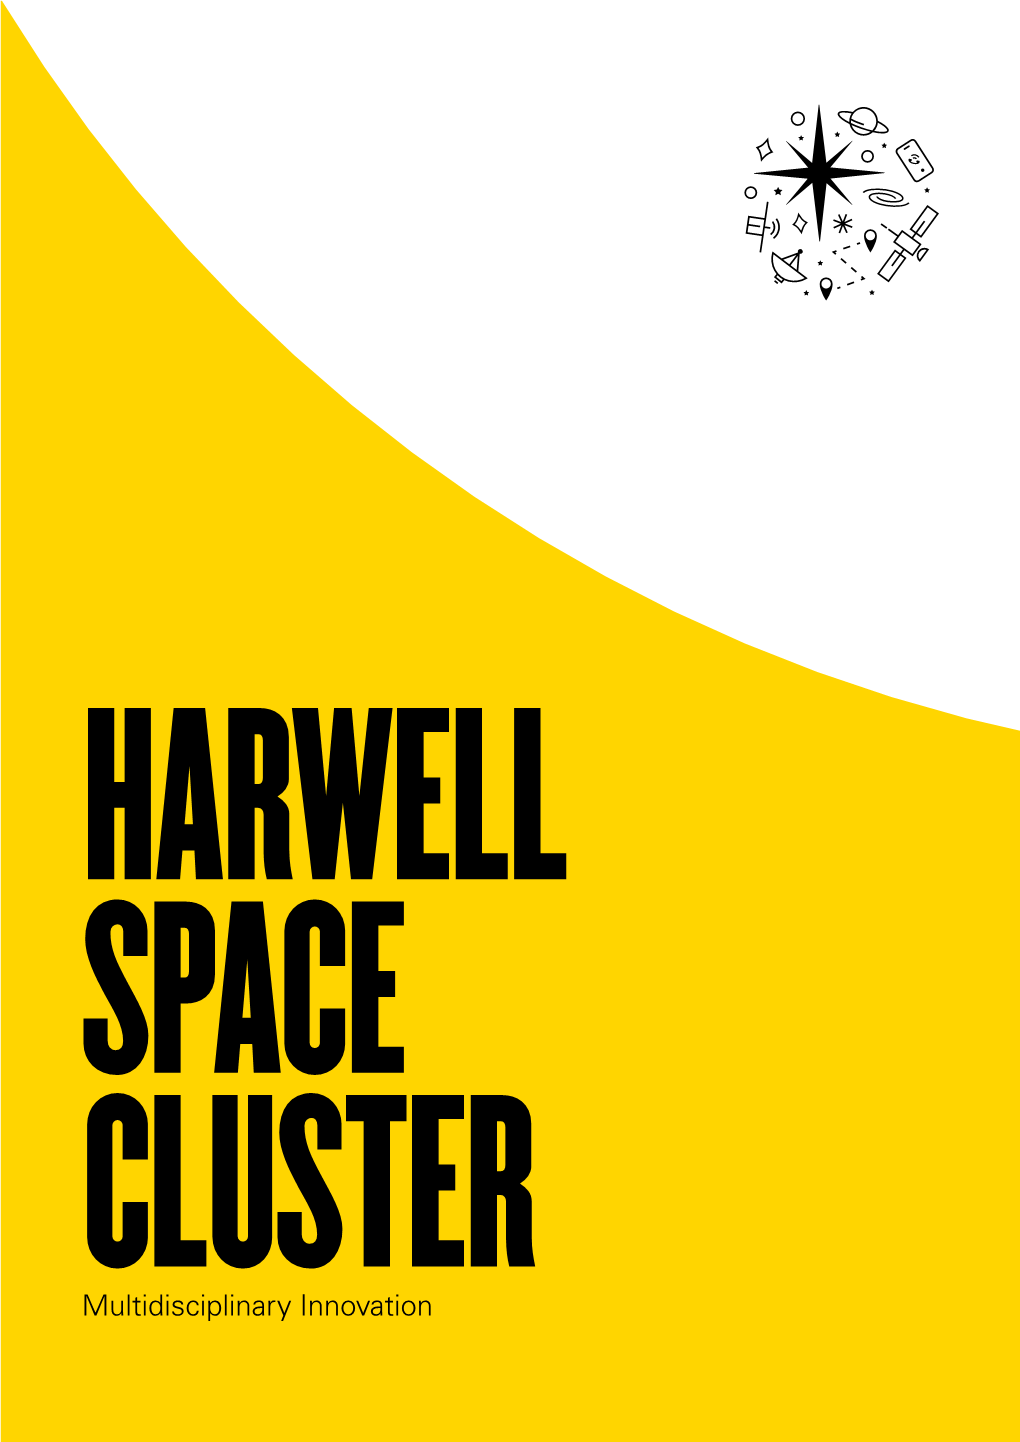 Multidisciplinary Innovation 6,000People 8 Building the Harwell Space Cluster